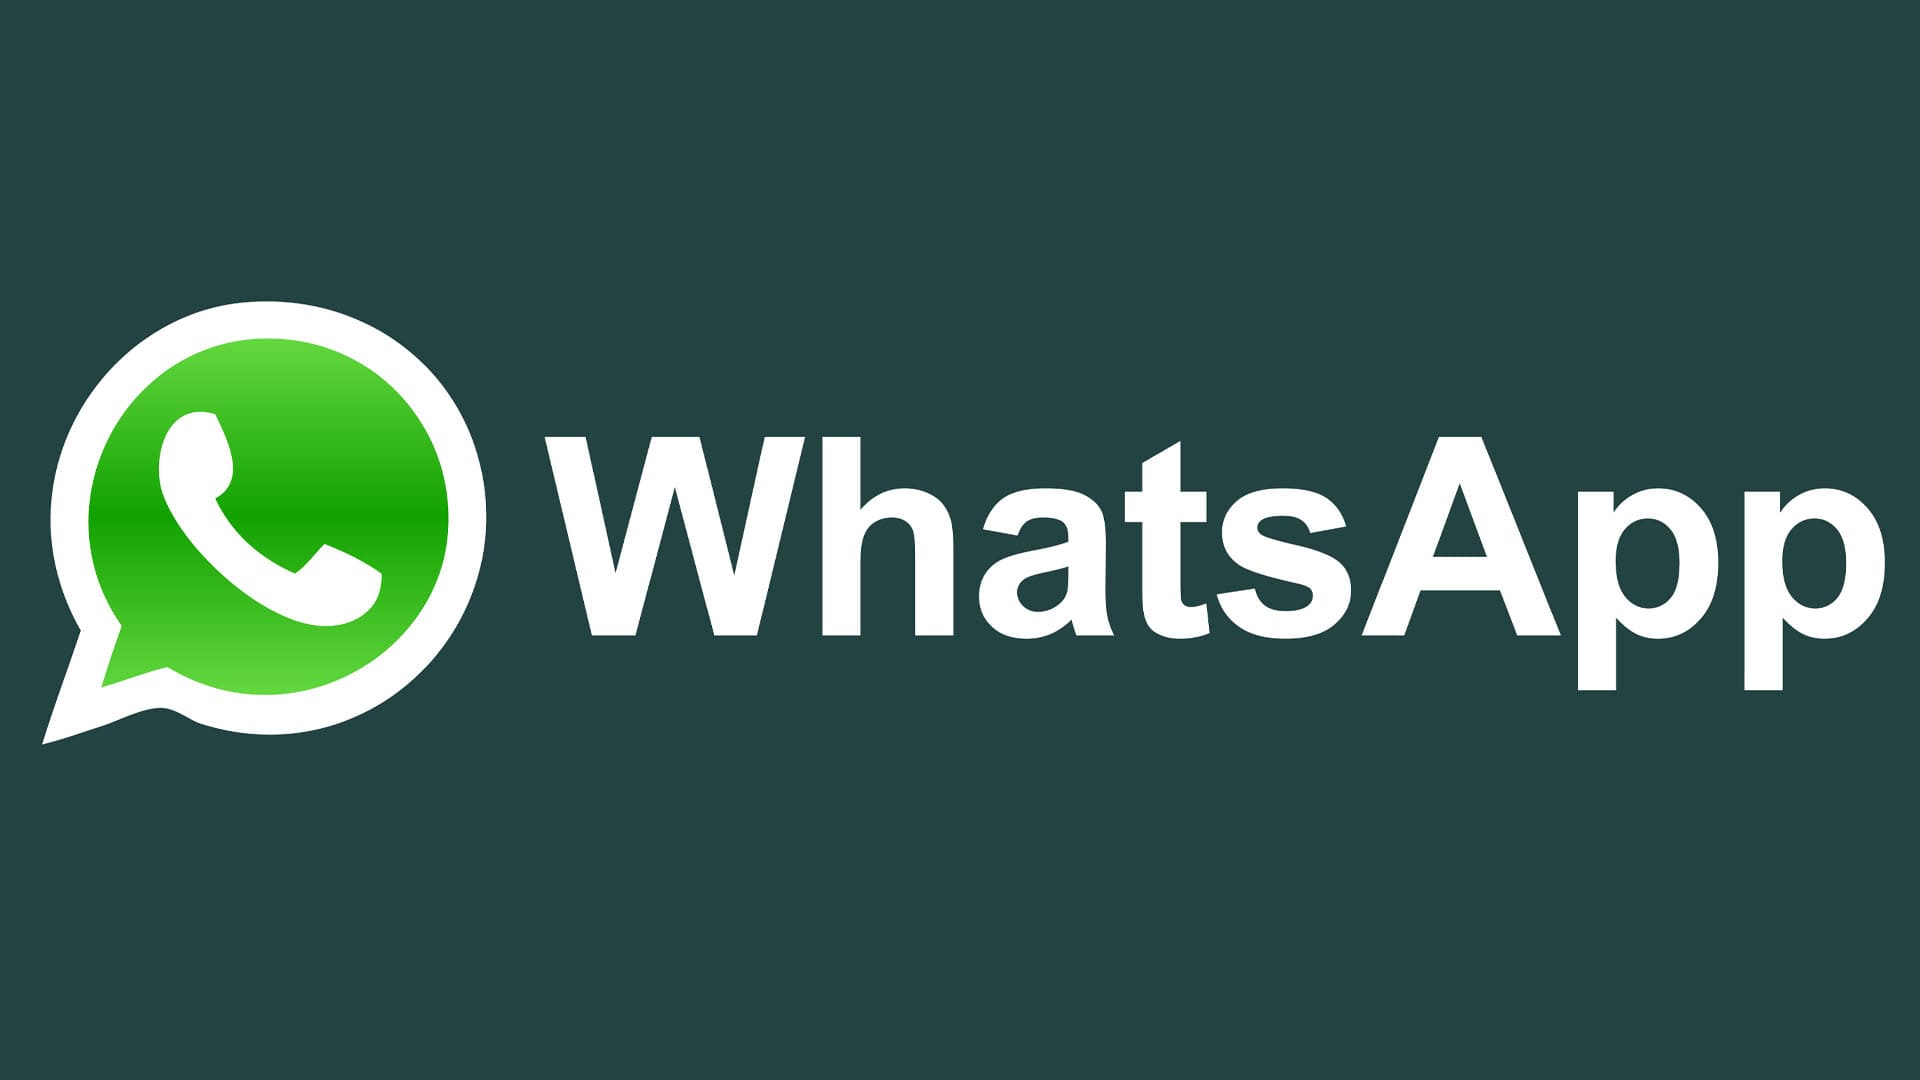 WhatsApp Introduces Screen Sharing: Share Real-Time Content During Video Calls